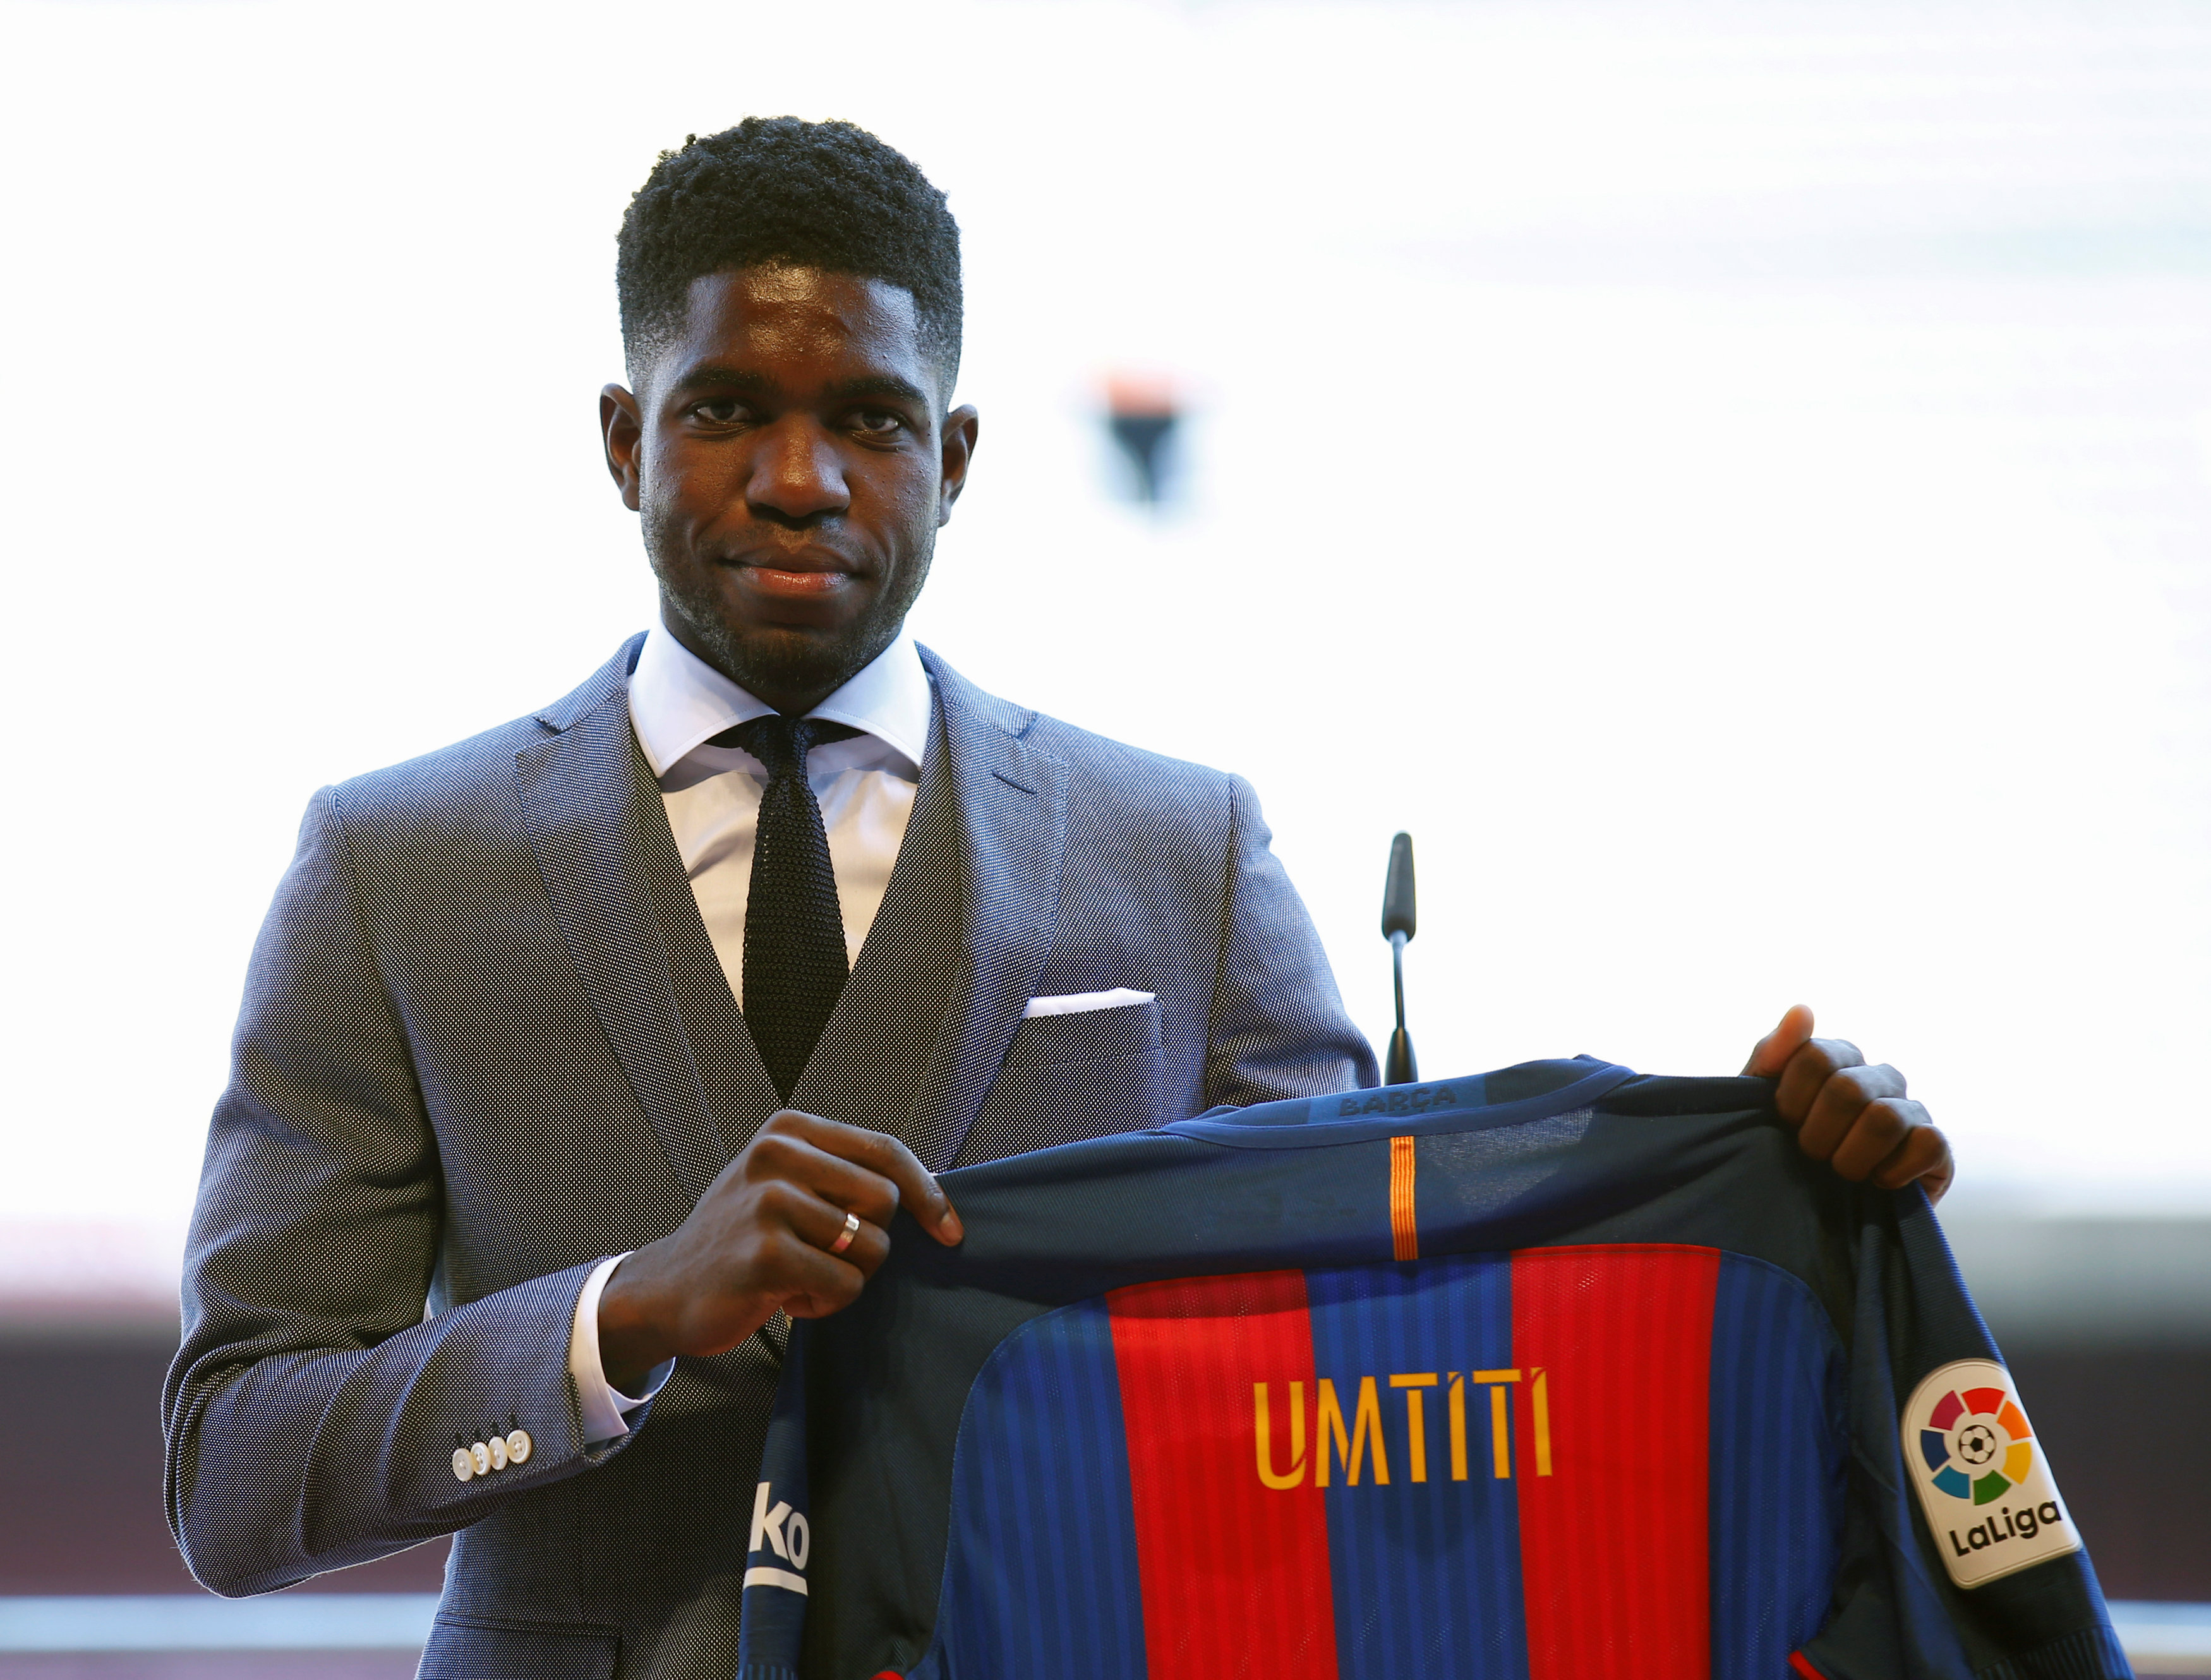 FC Barcelona's newly signed soccer player Samuel Umtiti poses with his new jersey during his presentation at Camp Nou stadium in Barcelona, Spain, July 15, 2016. REUTERS/Albert Gea